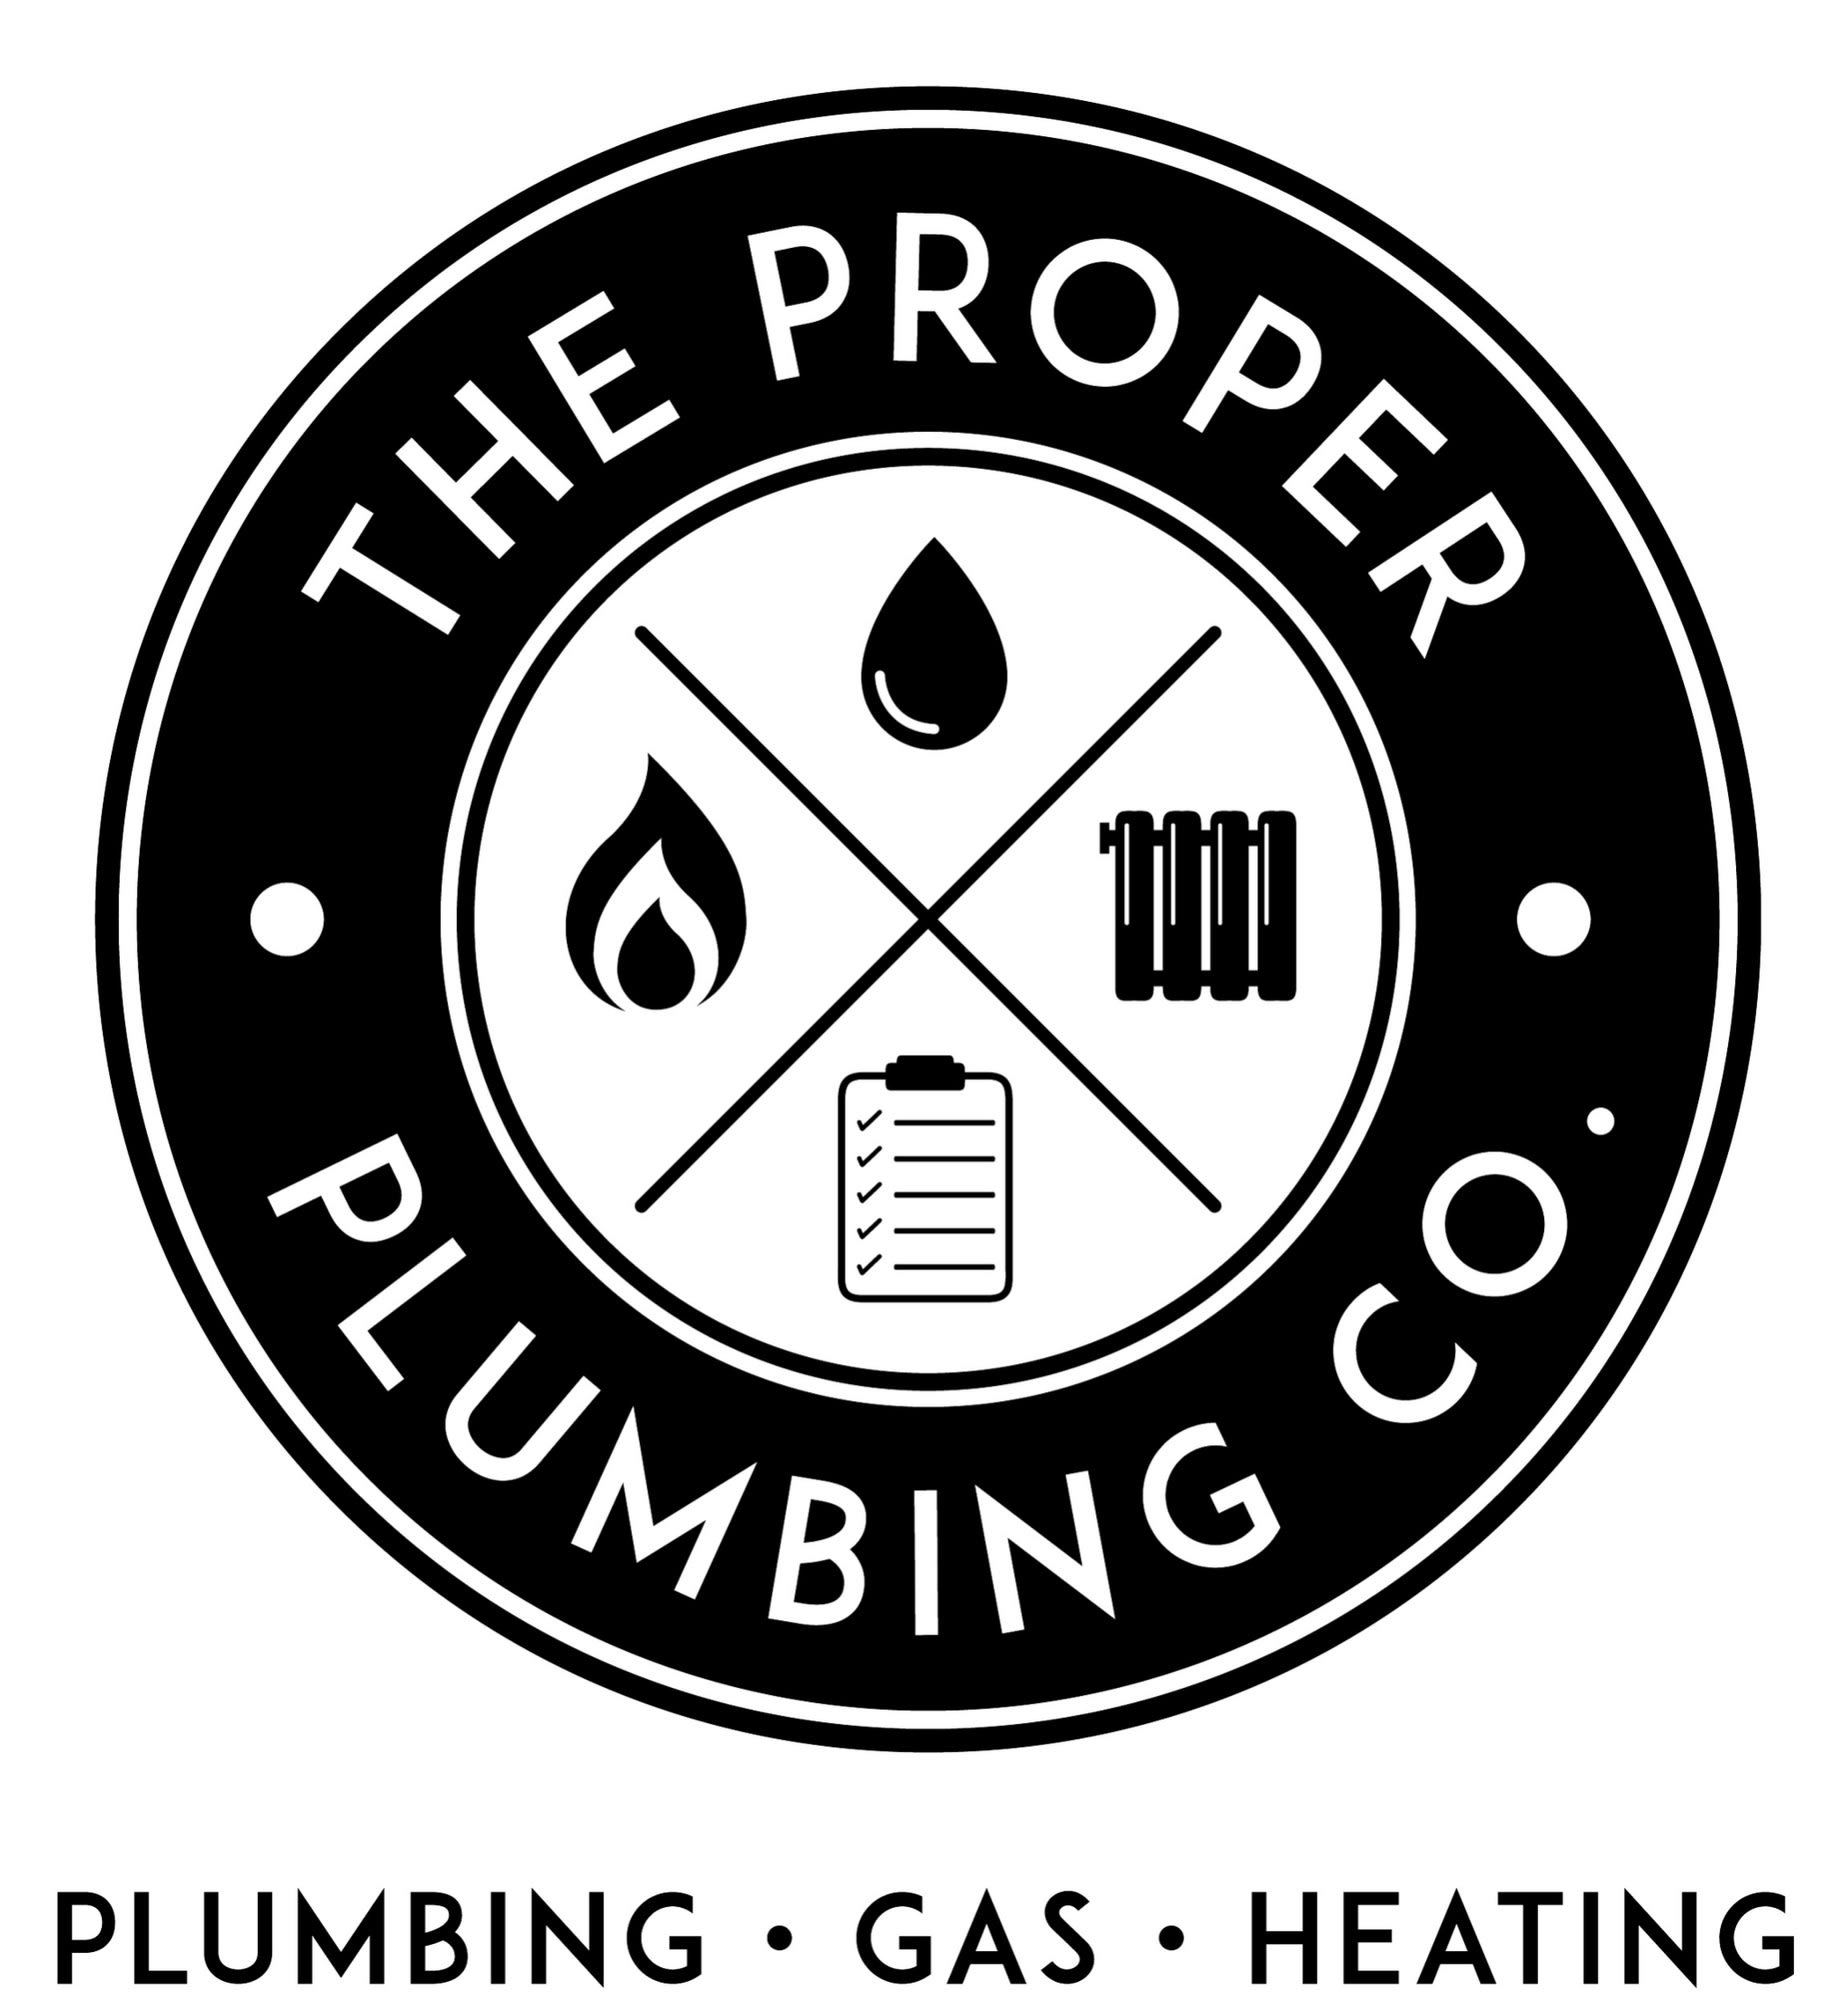 Images The Proper Plumbing Co.